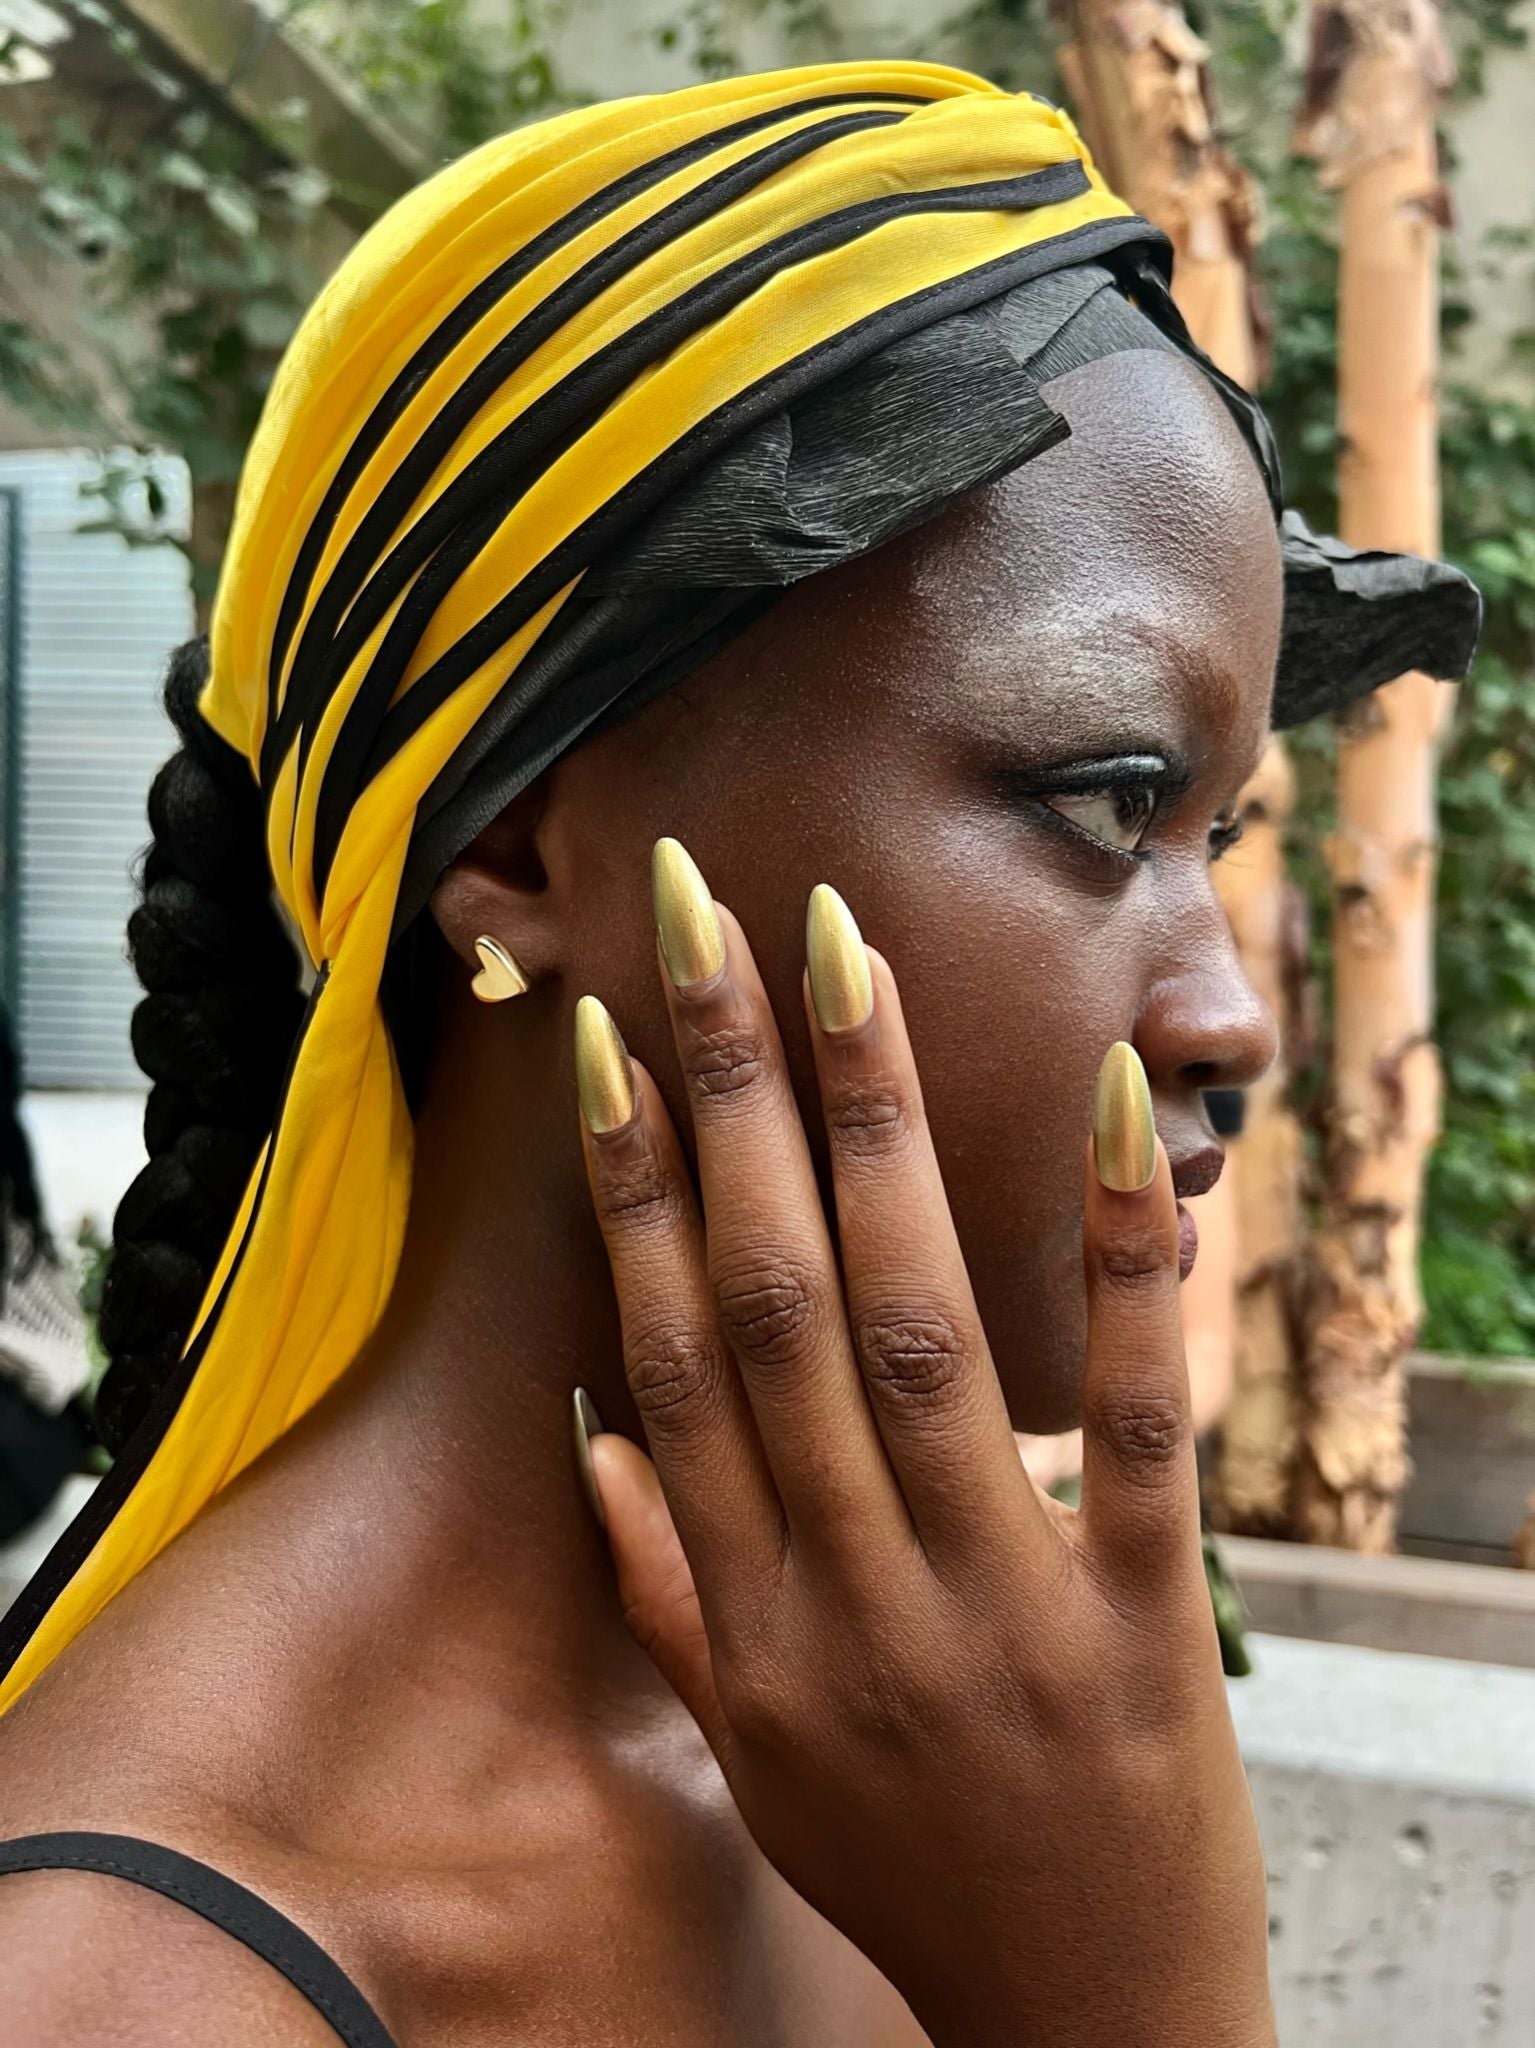 NYFW Nail Inspiration You Need For Your Next Manicure